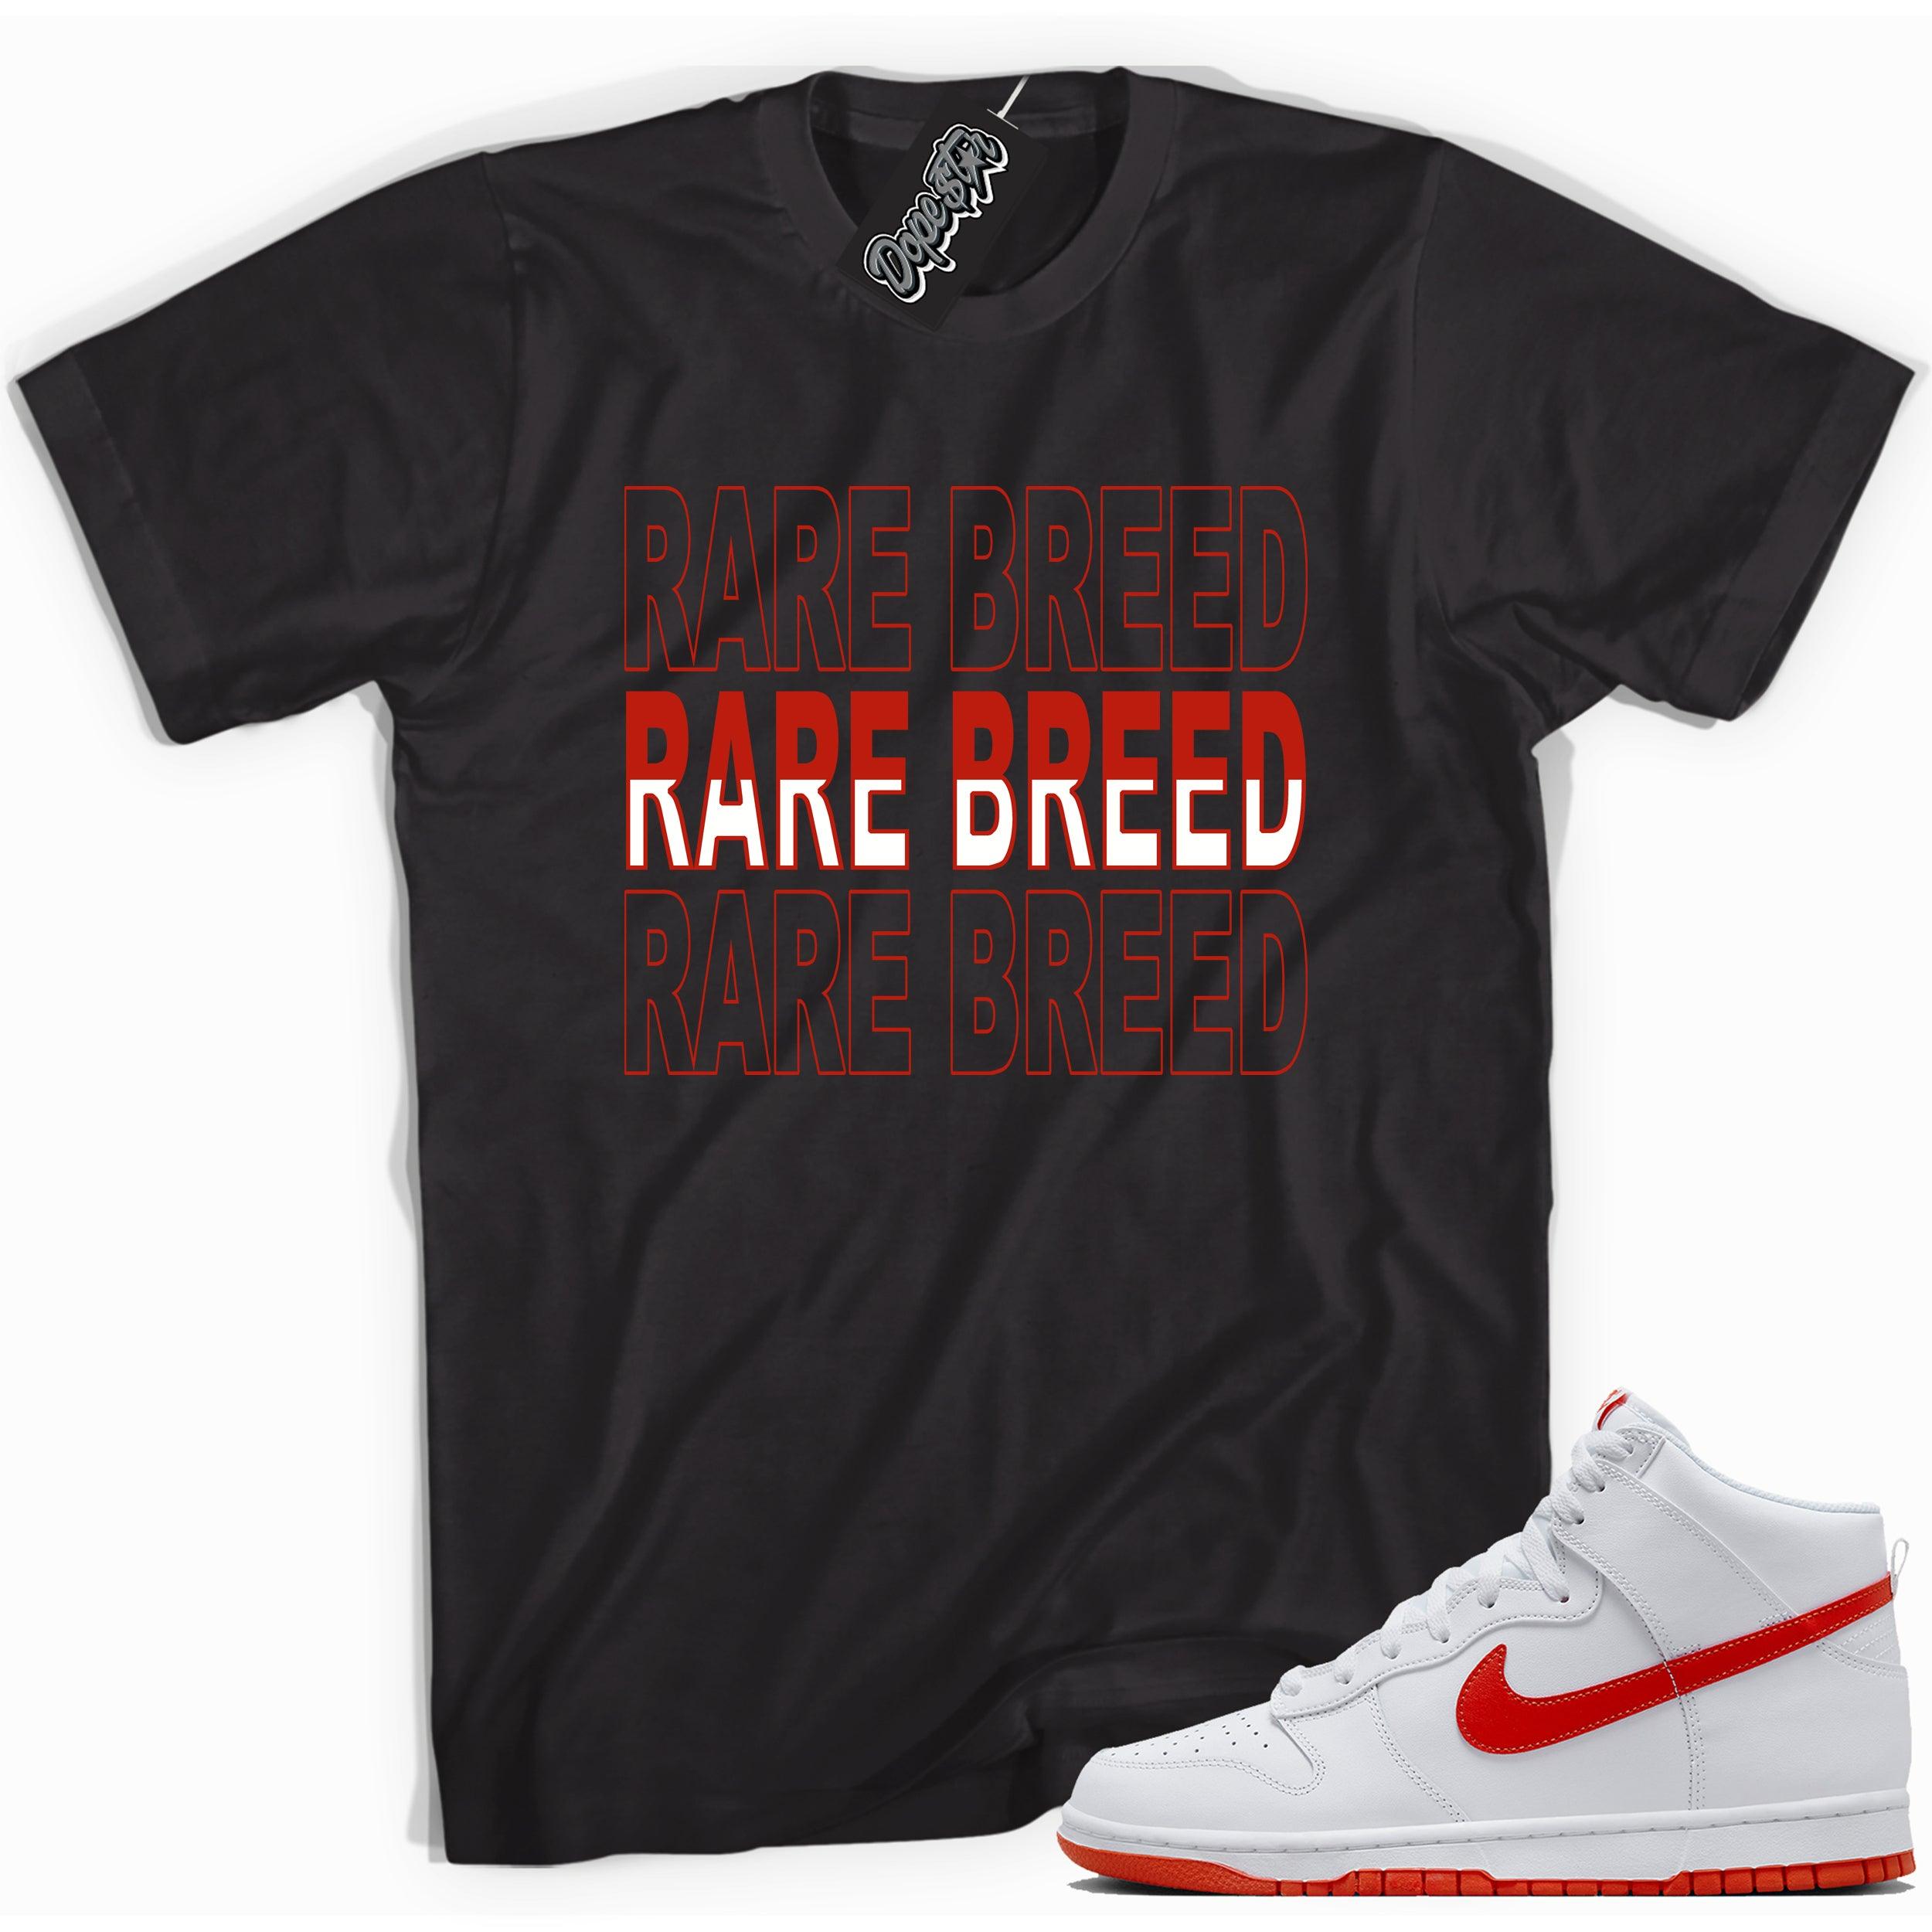 Cool black graphic tee with 'rare breed' print, that perfectly matches Nike Dunk High White Picante Red sneakers.